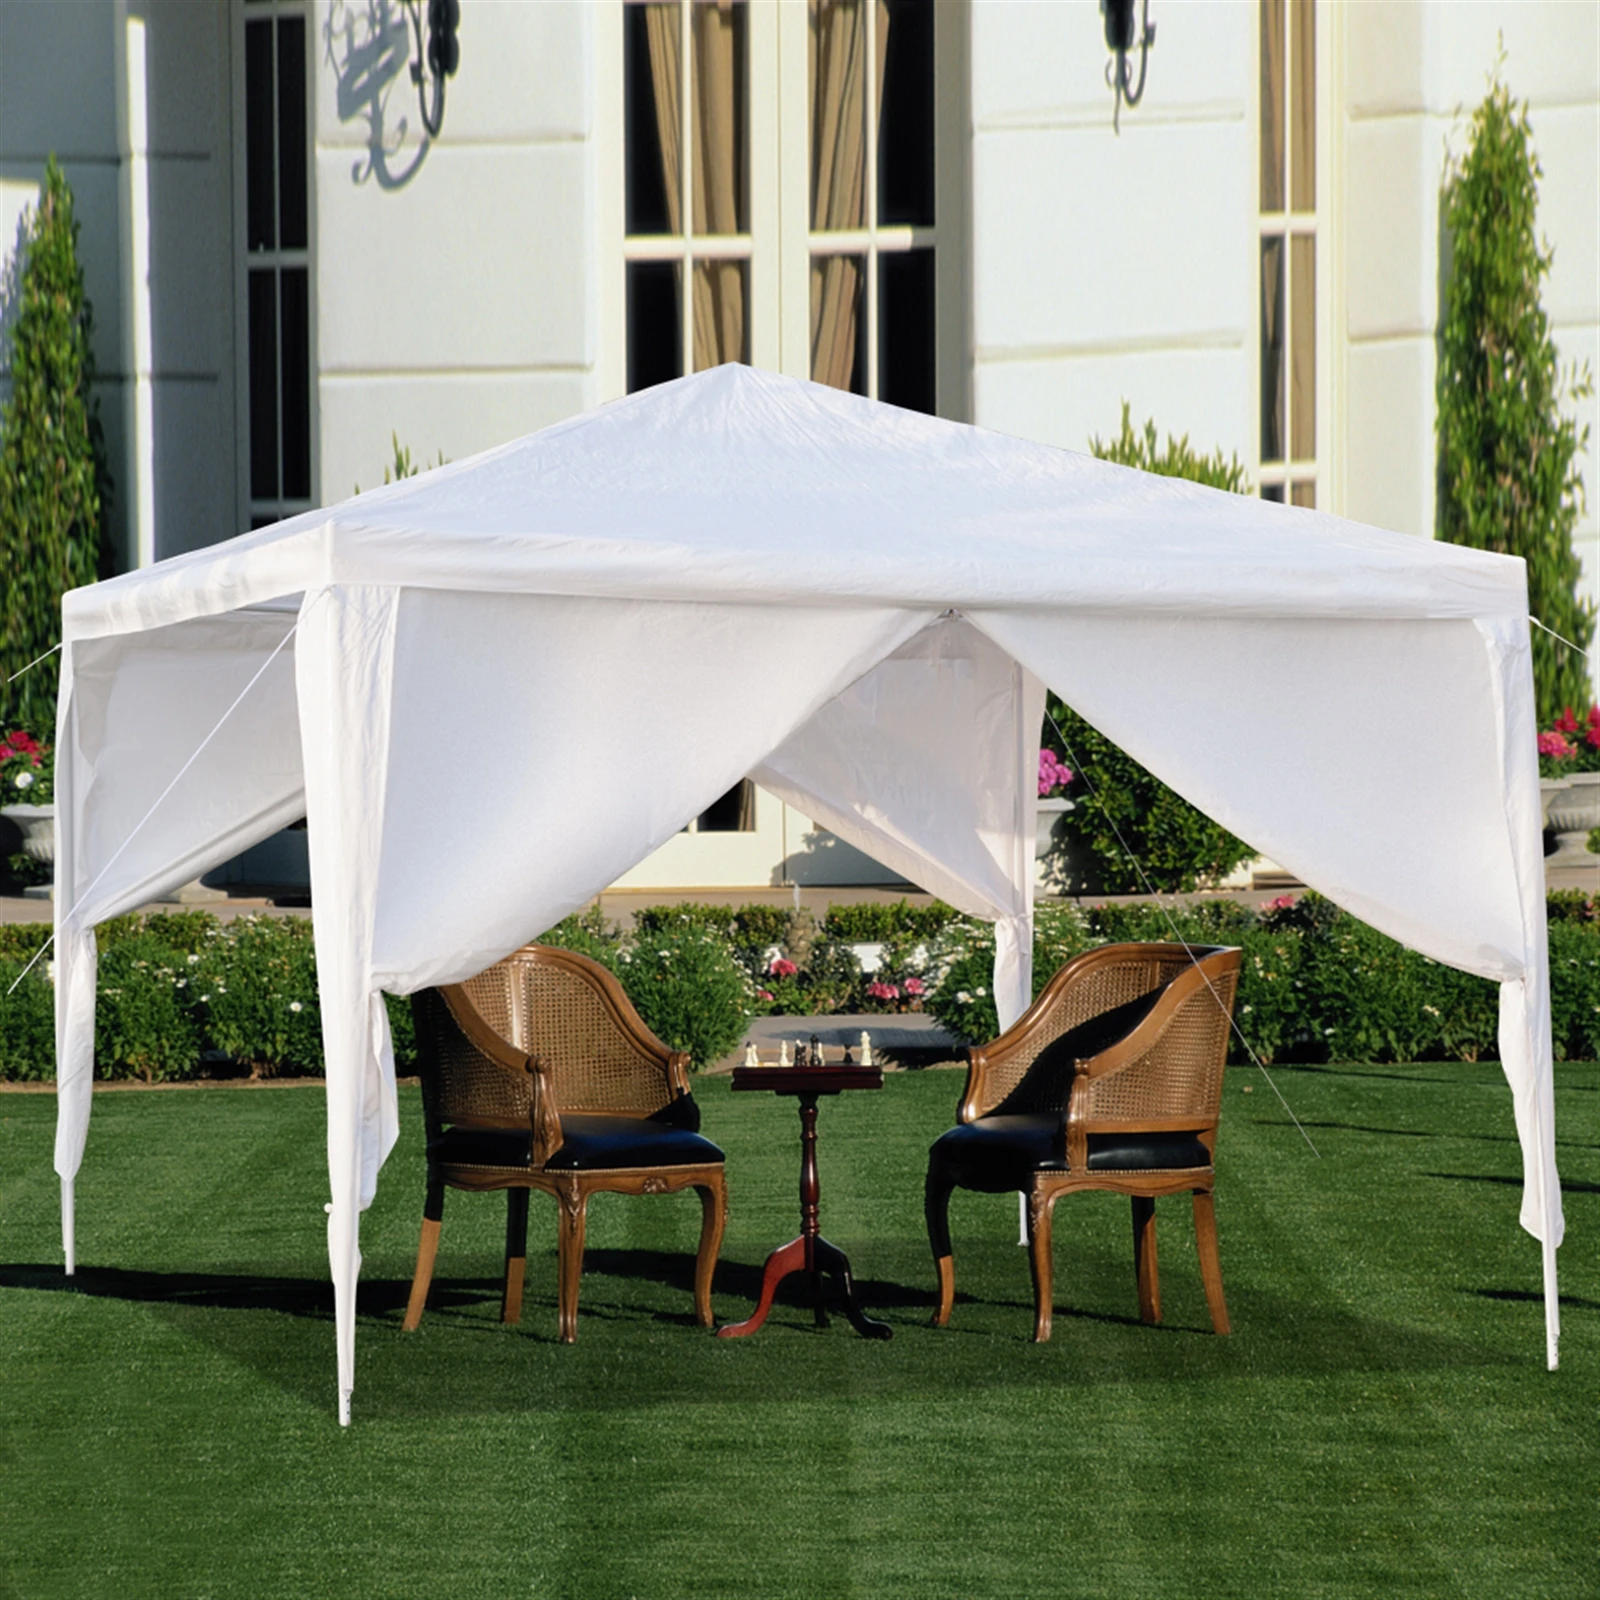 Portable White Sun Shelter Tent Side Wall PE Waterproof Surface Replacement Gazebo Garden Shade Shelter 4 Side Canopy Top 3 x 3m